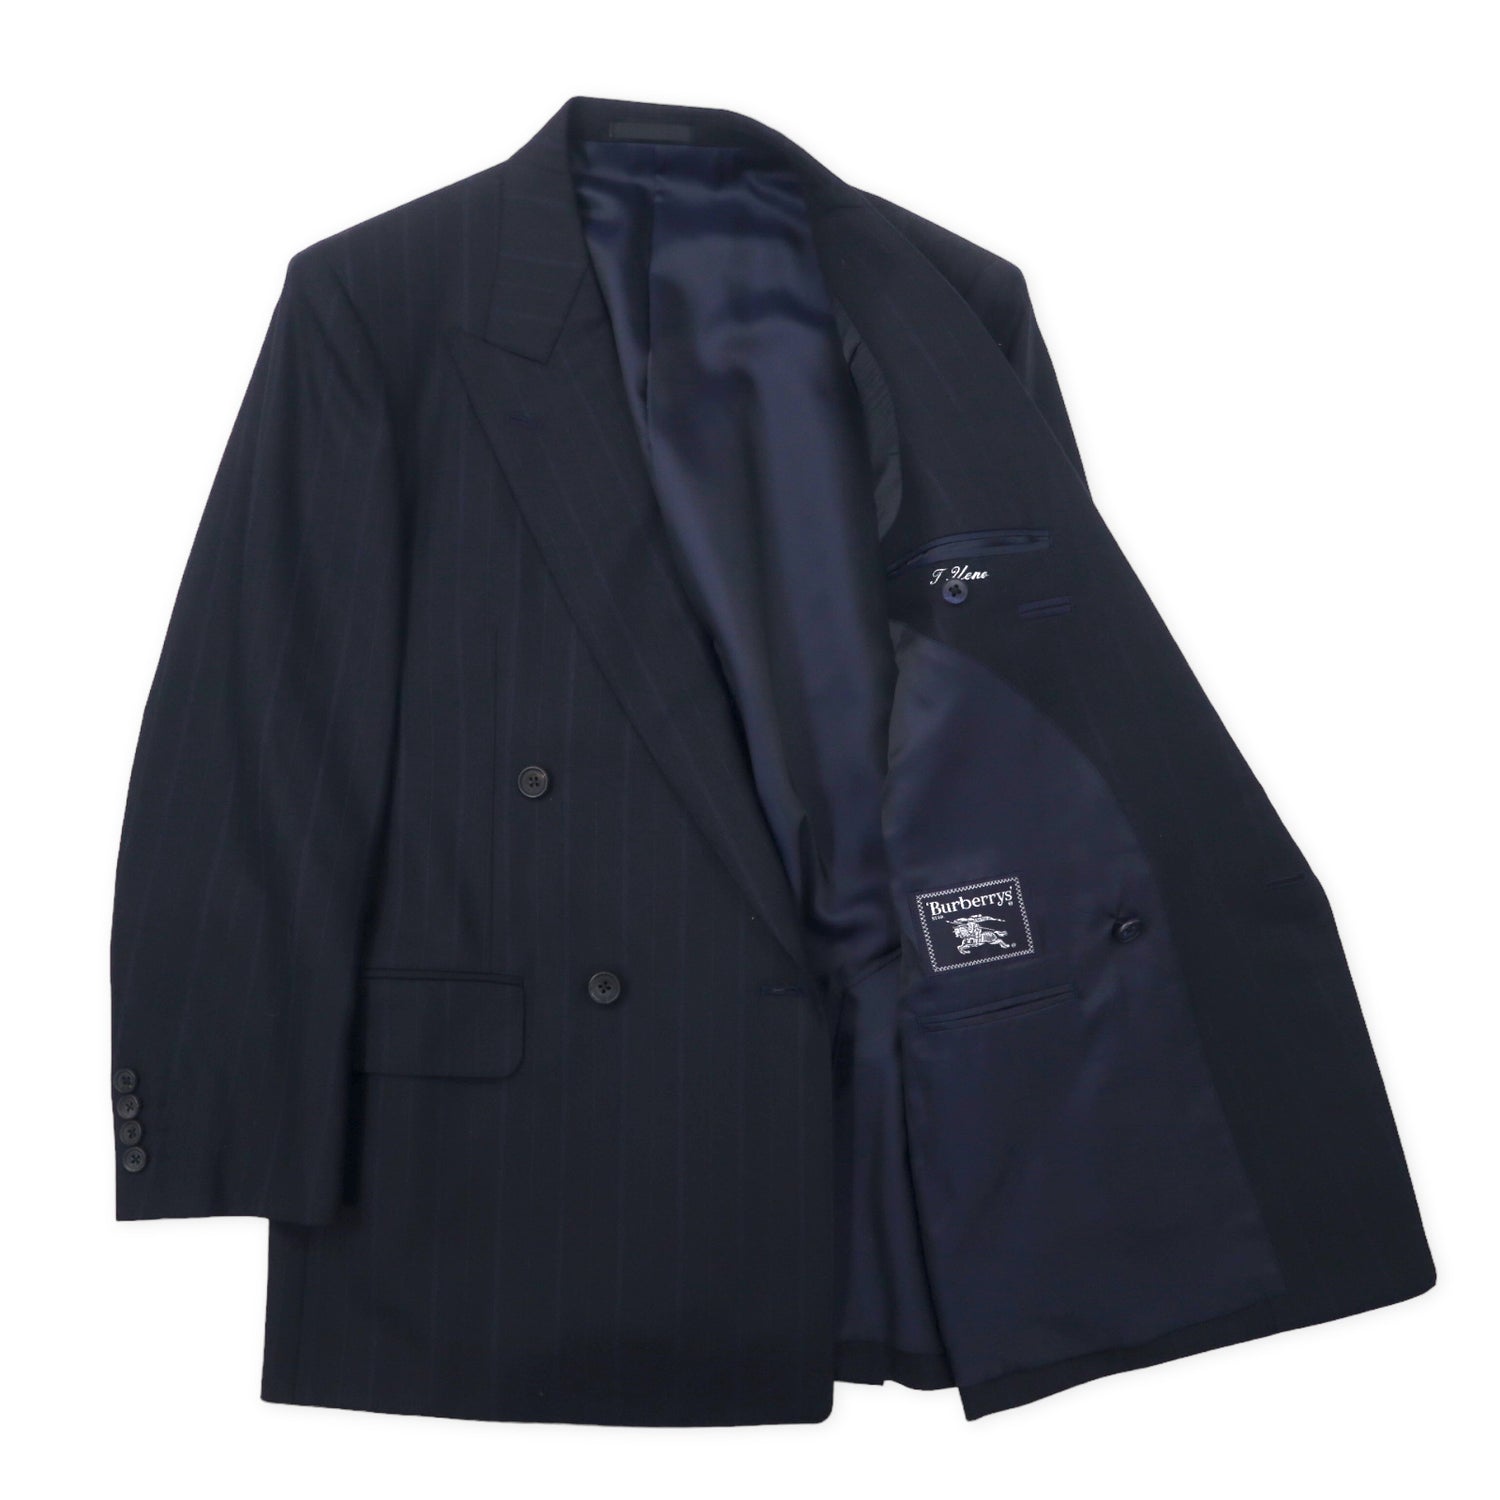 BURBERRYS Double Suit Setup 96-86-170 AB5 Navy Striped Wool Wool